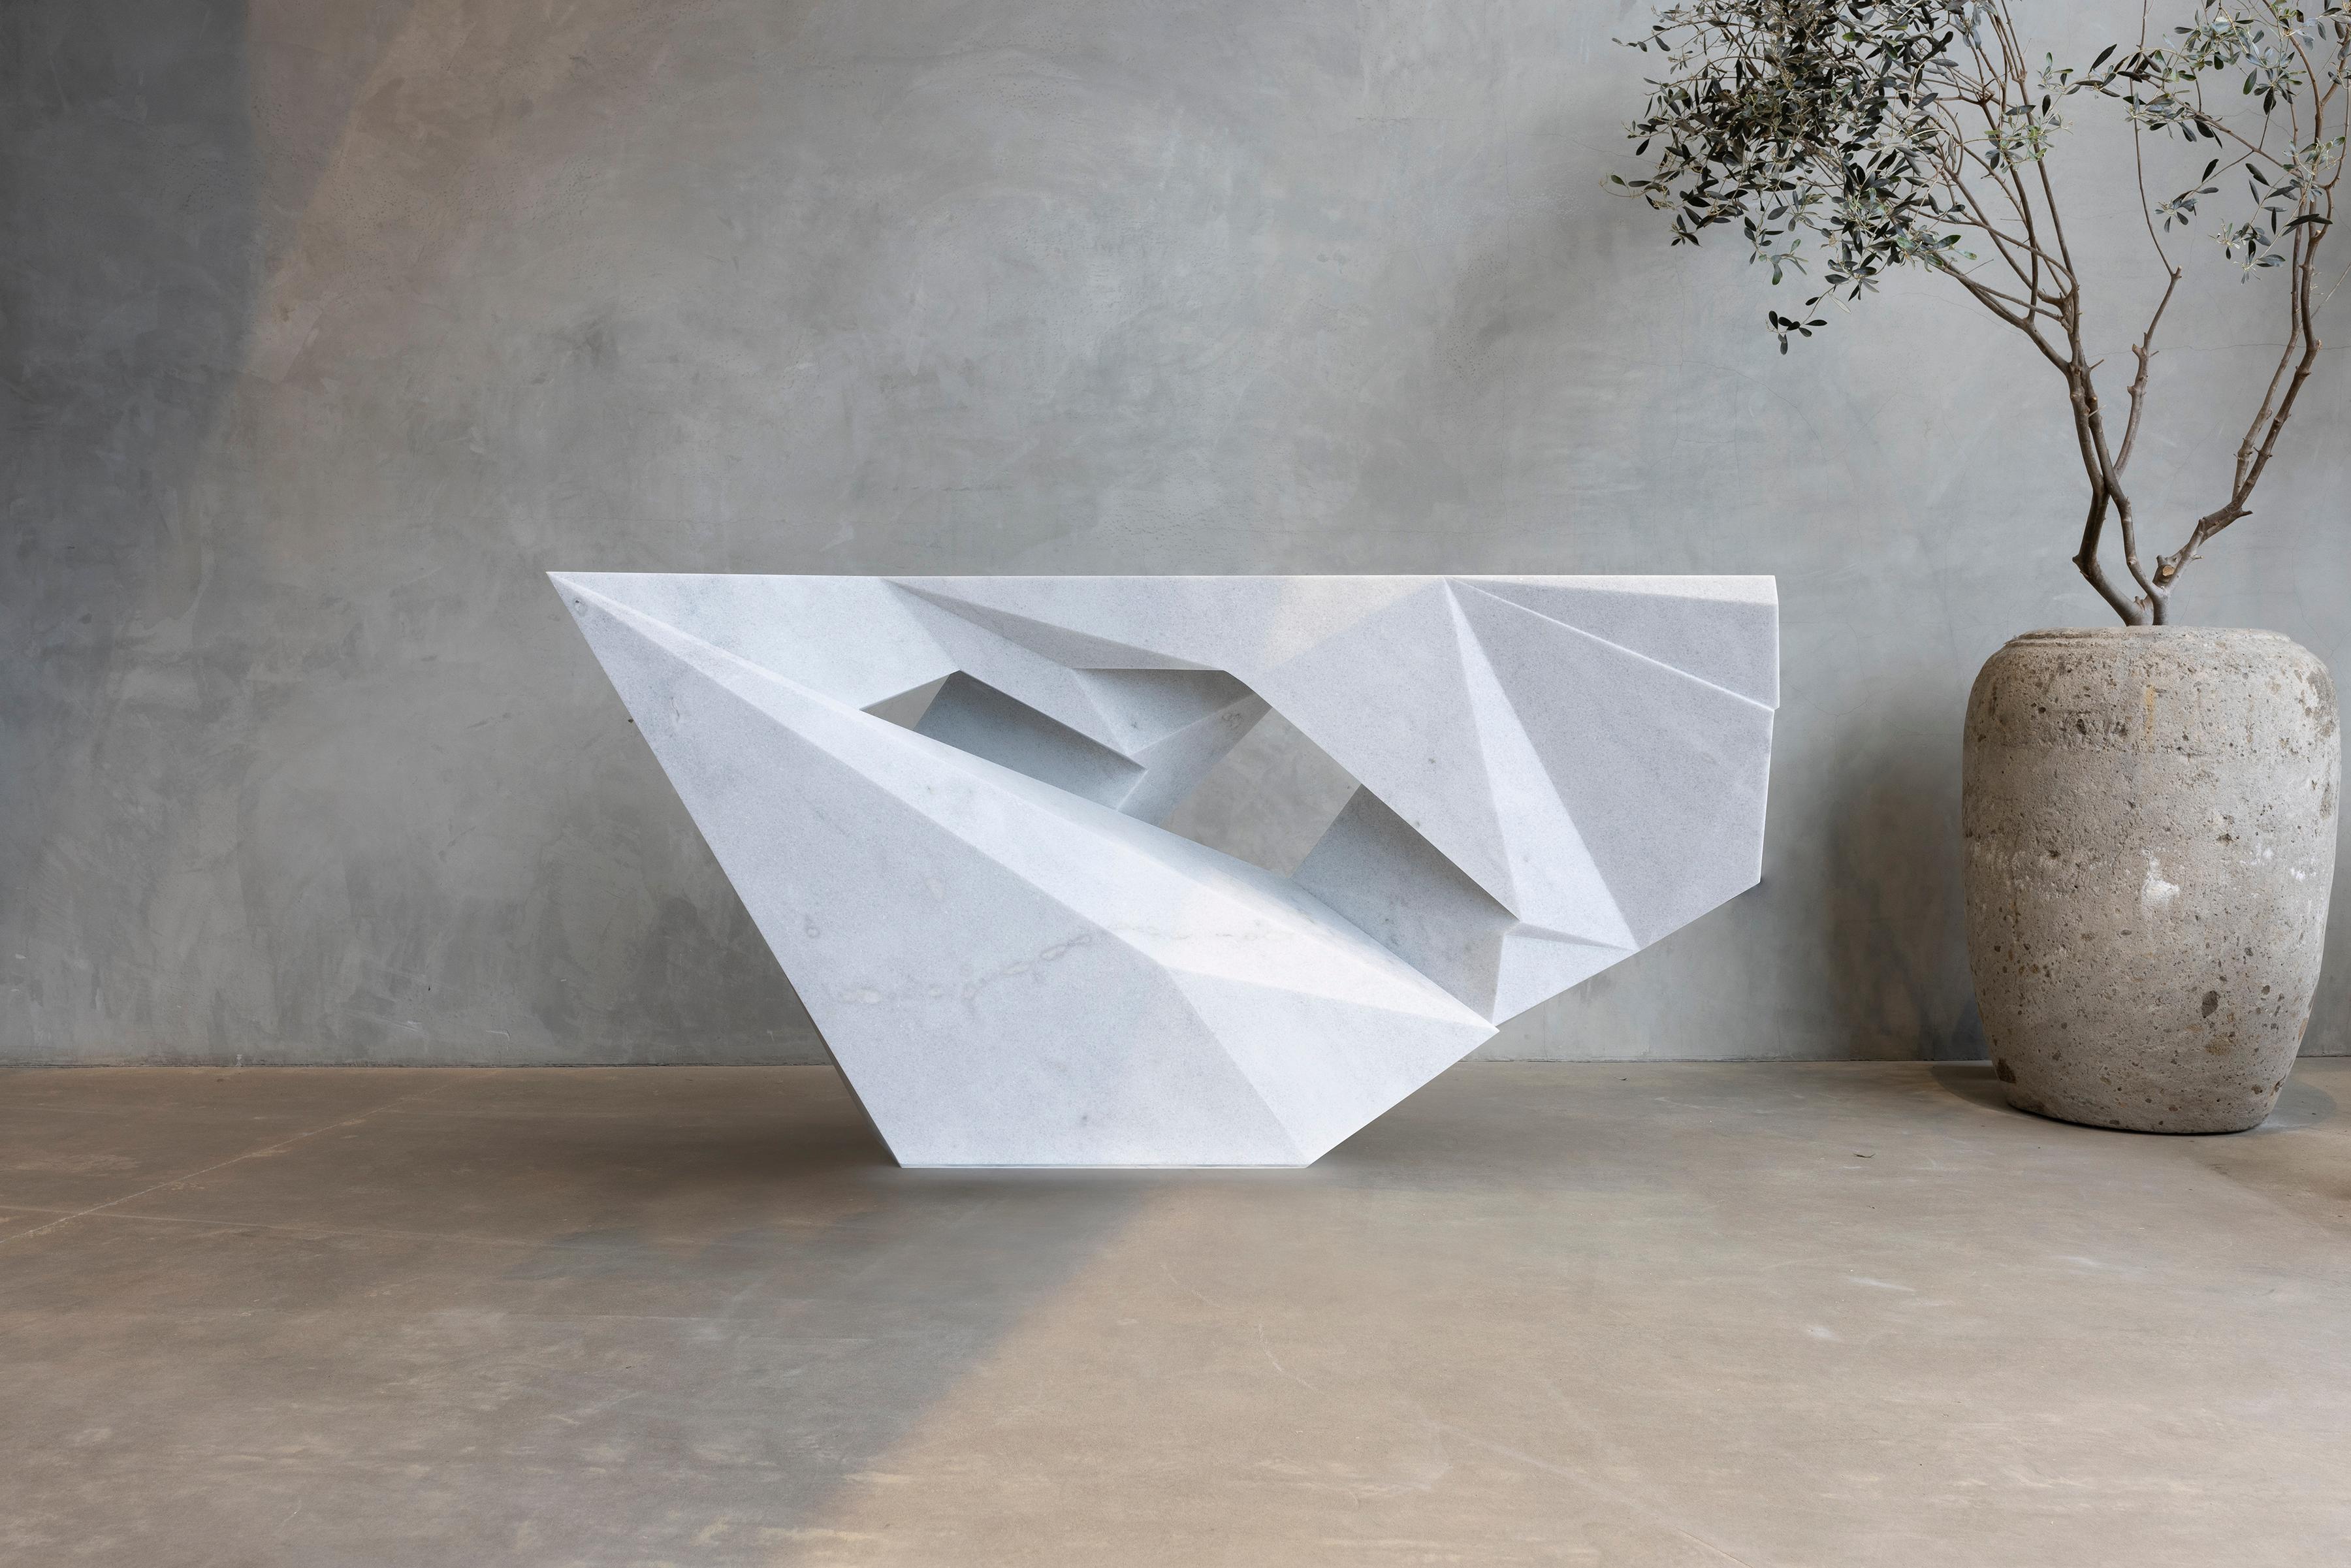 The Drift Credenza by William Emmerson
Limited Edition Of 2 Pieces.
Dimensions: D 12.75 x W 69.25 x H 32.5 cm.
Materials: Naxos marble.
 
A shape. A floating mass of white marble turned into a piece of functional sculpture representing the beauty